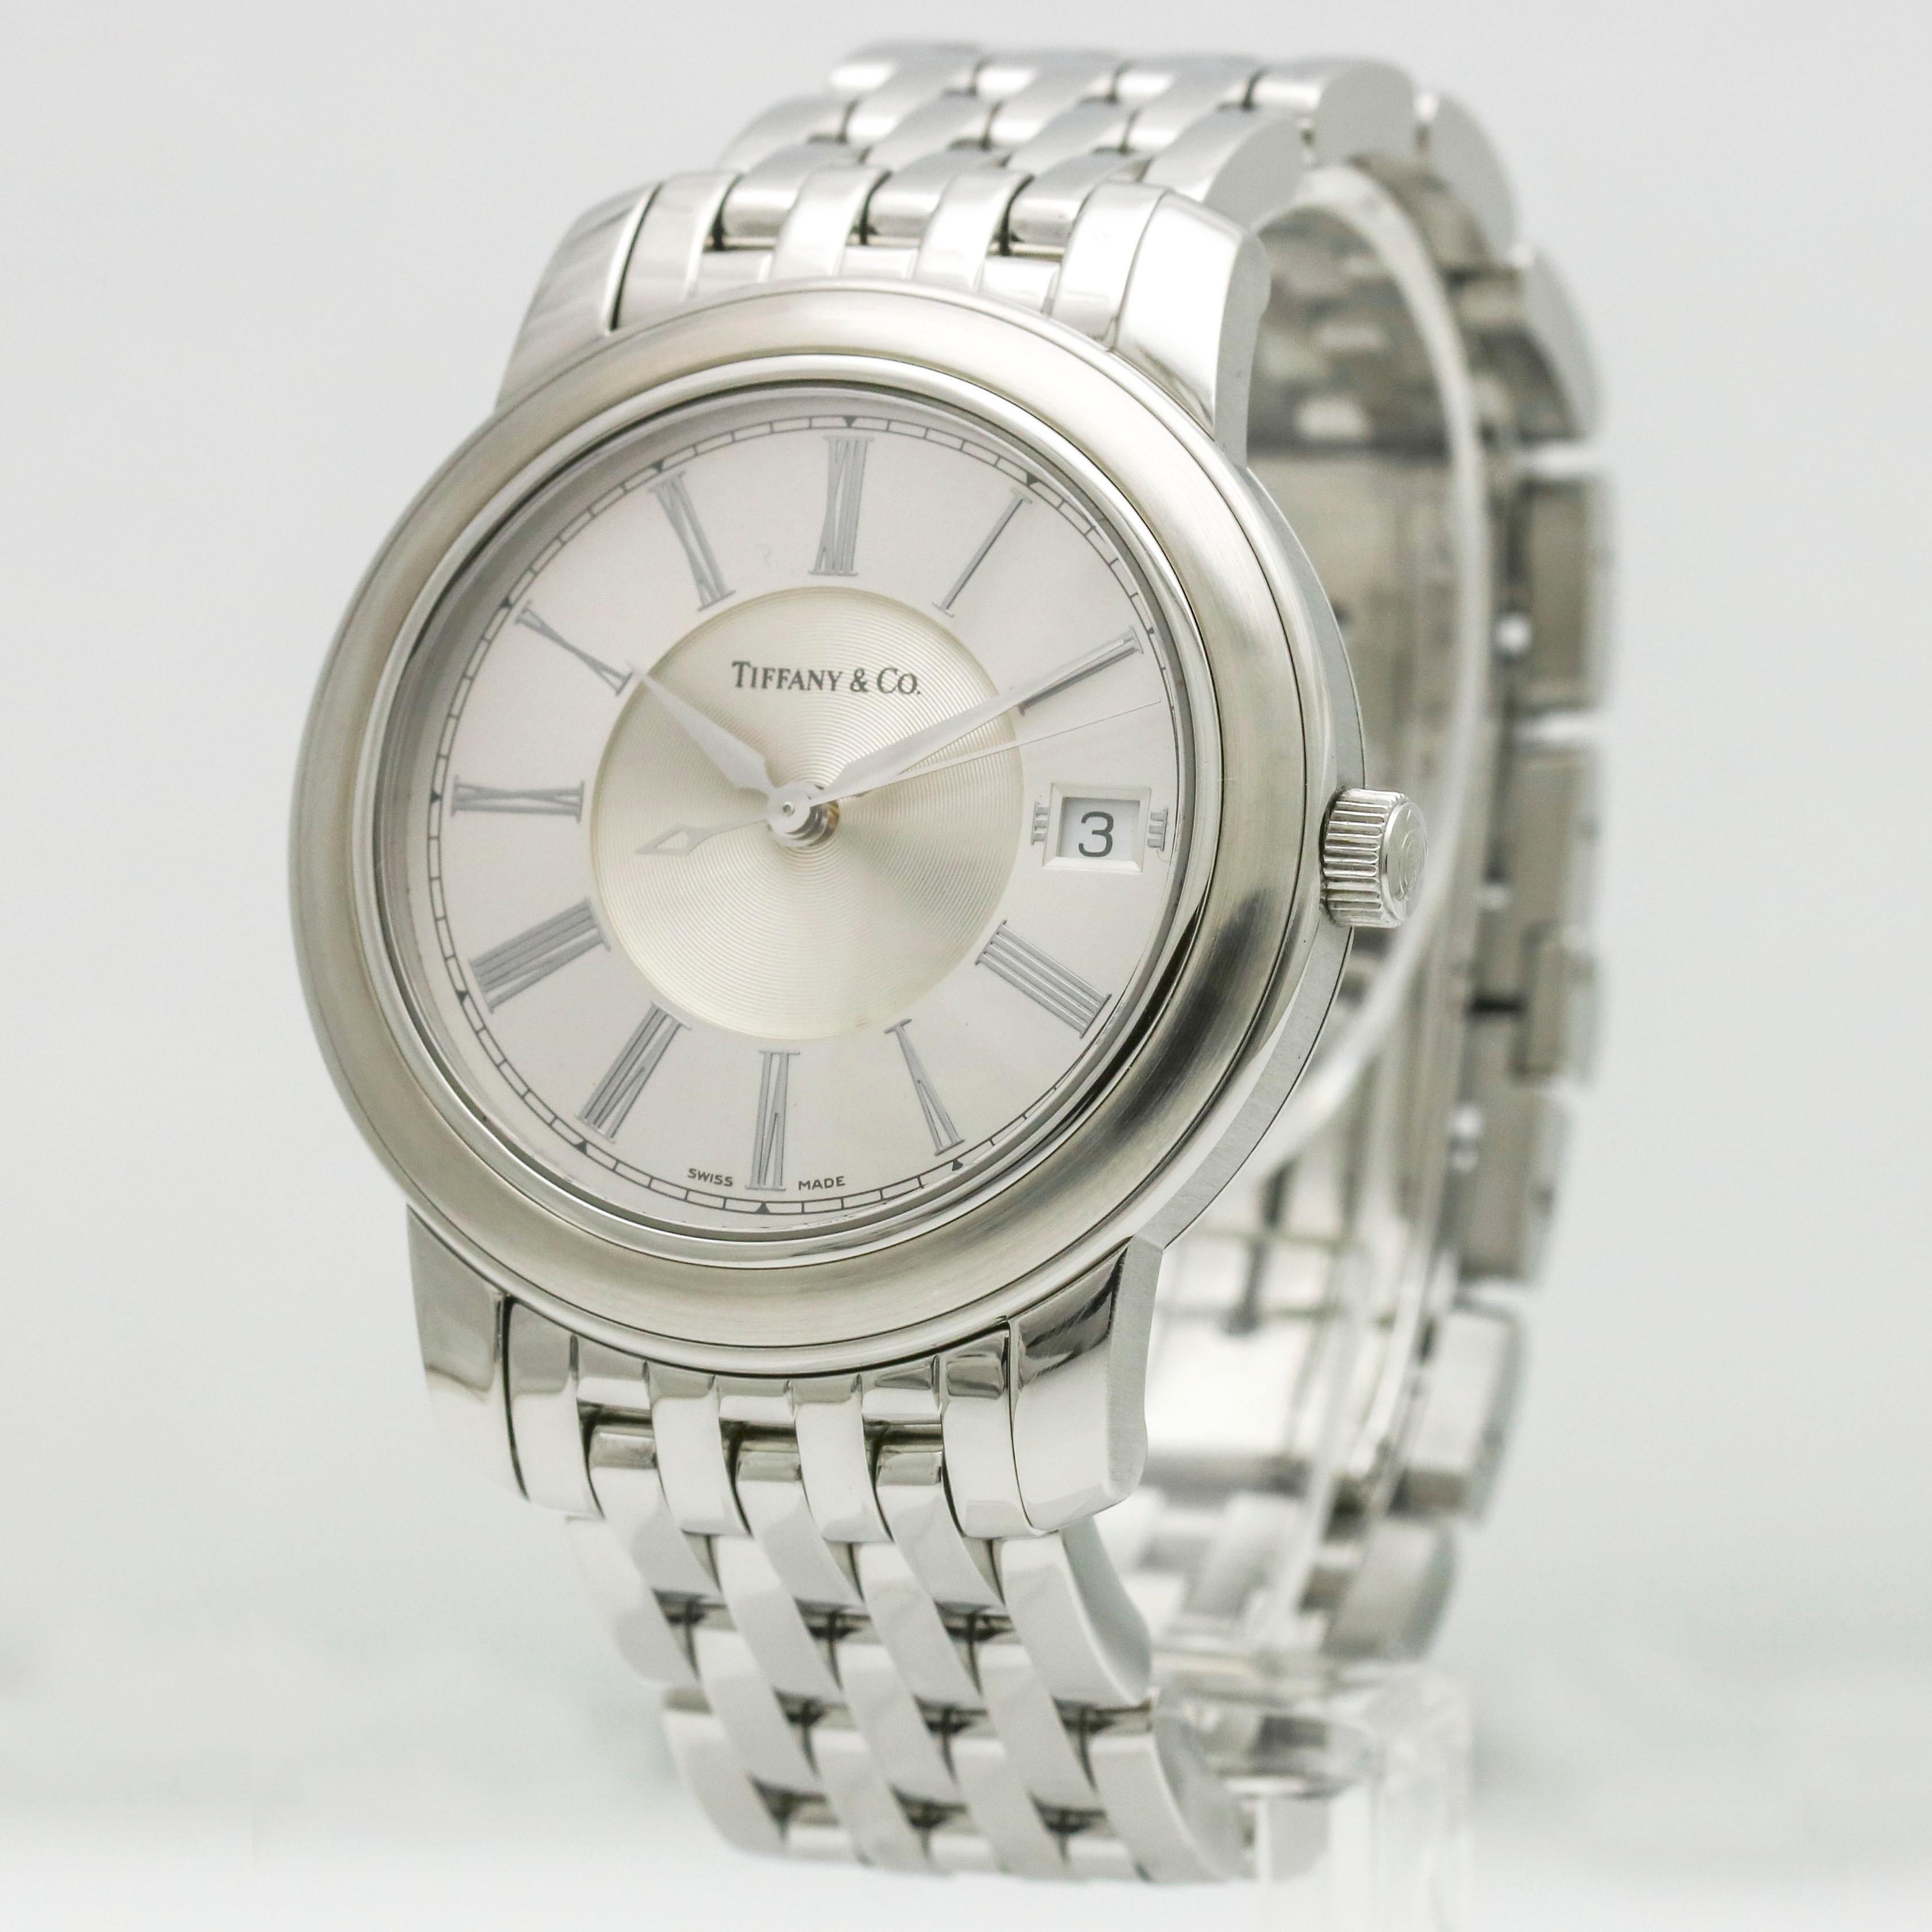 Women's or Men's Tiffany & Co. Stainless Steel Mark Automatic Chronometer Round Men's Wristwatch